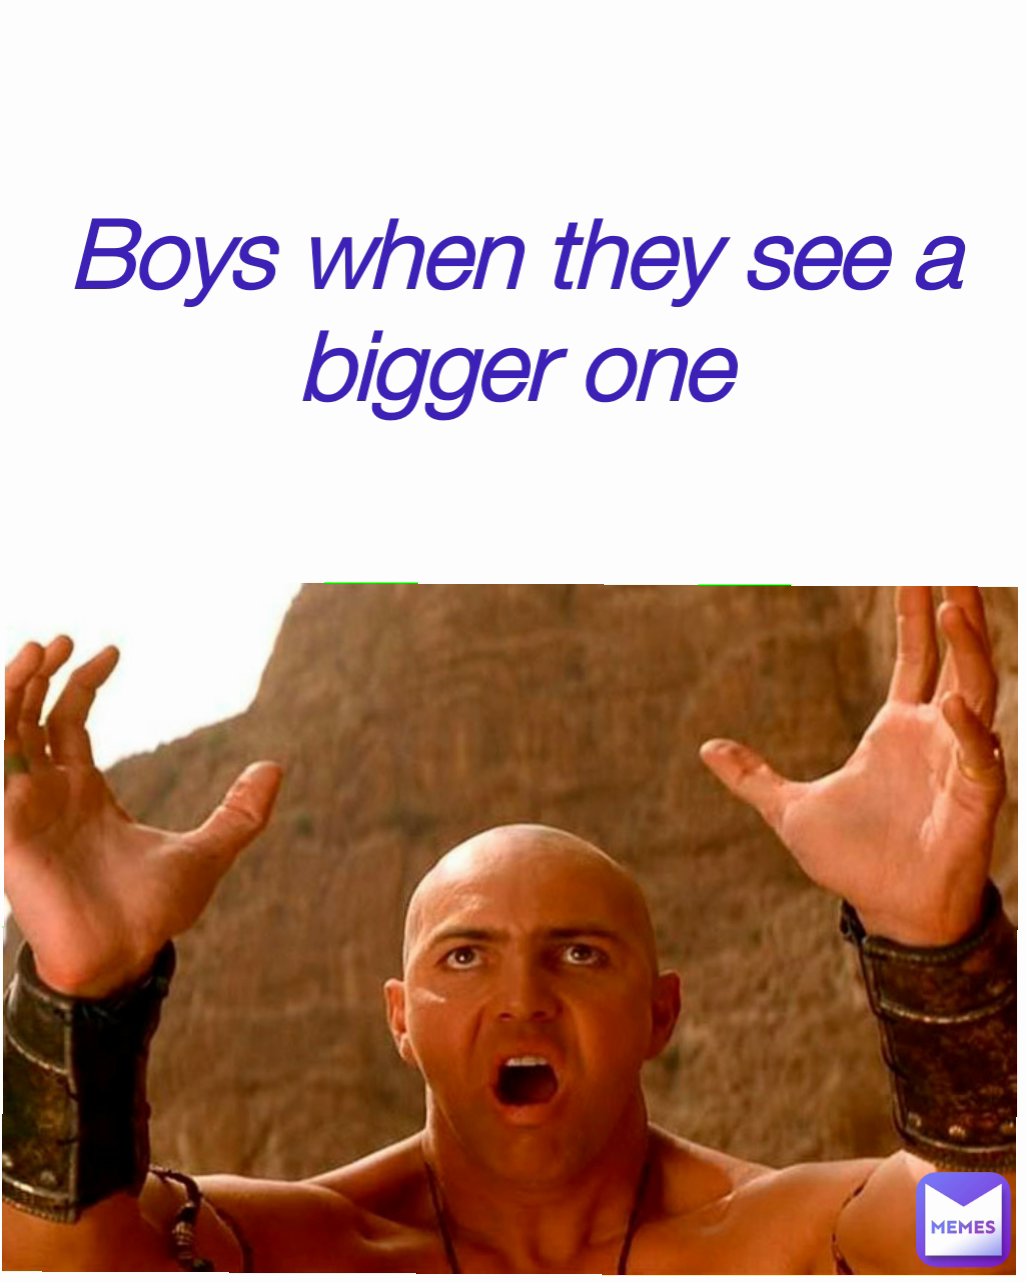 Boys when they see a bigger one